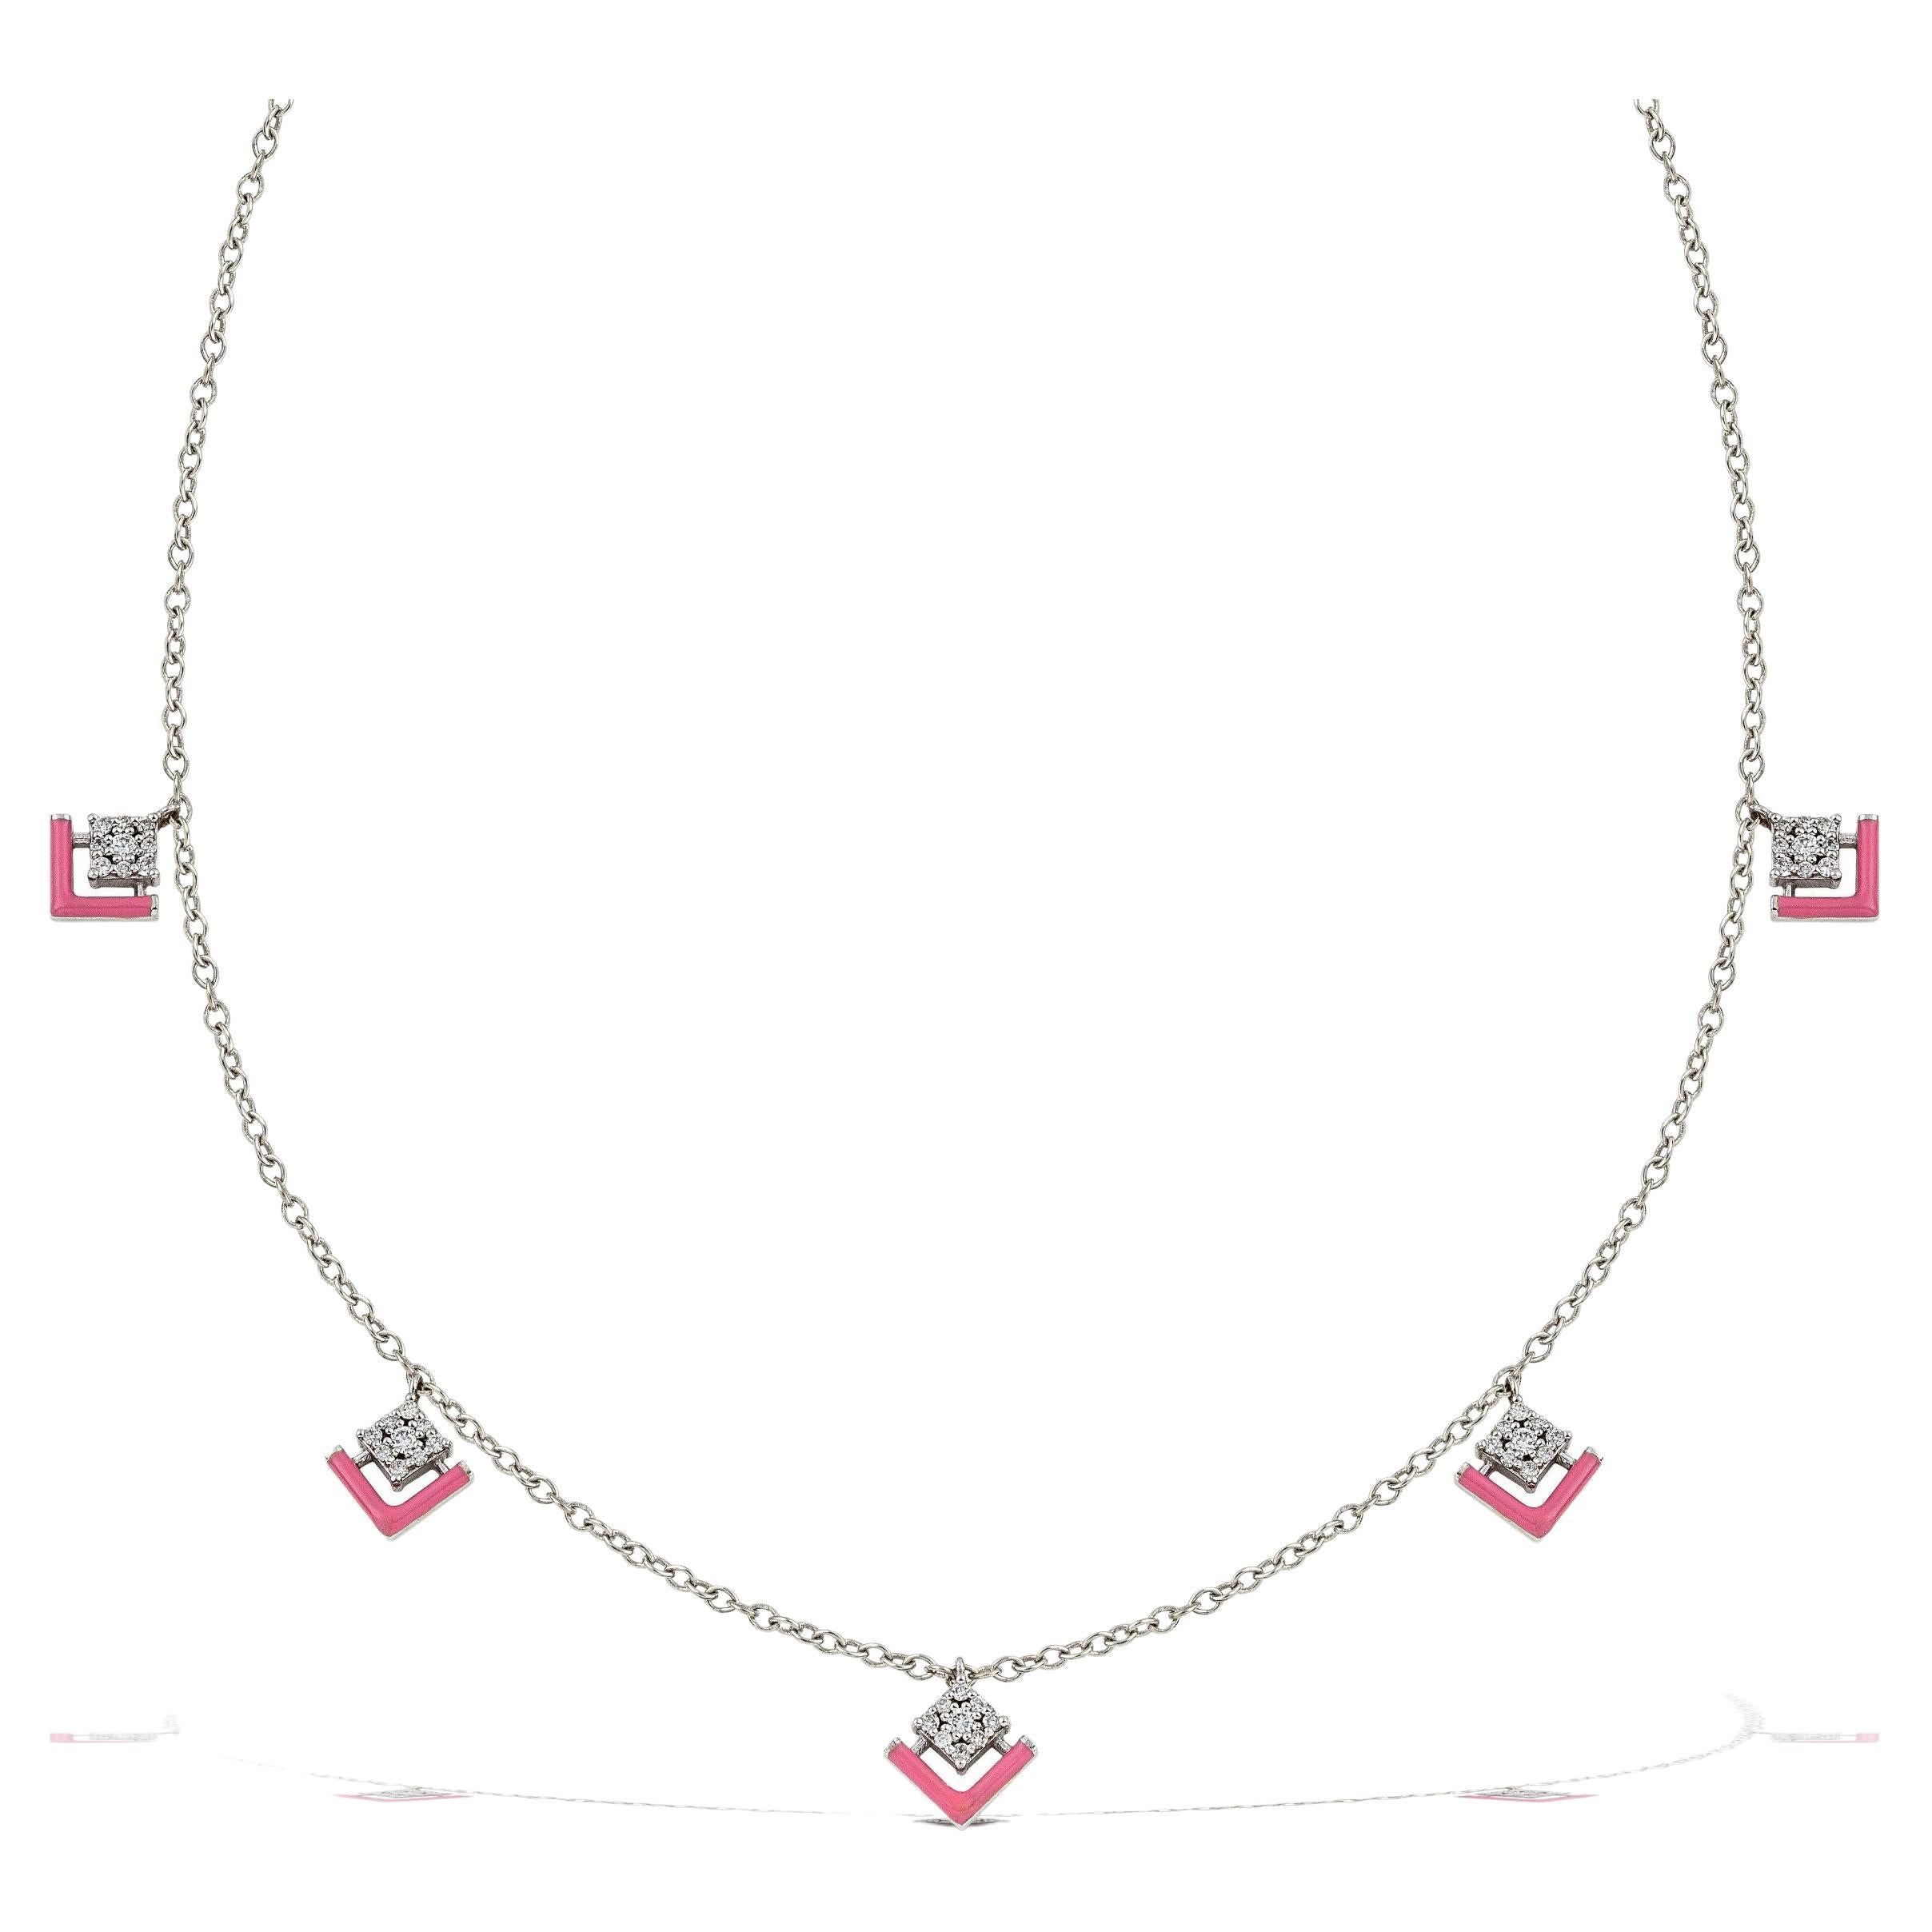 100% Recycled 14 K White Gold
Diamonds

Enamel

Size: 40 cm and 3 cm Extension/ 15,7 inches and 1.1 inch Extension

In the arts, maximalism, a reaction against minimalism, is an aesthetic of excess.

The philosophy can be summarized as “more is